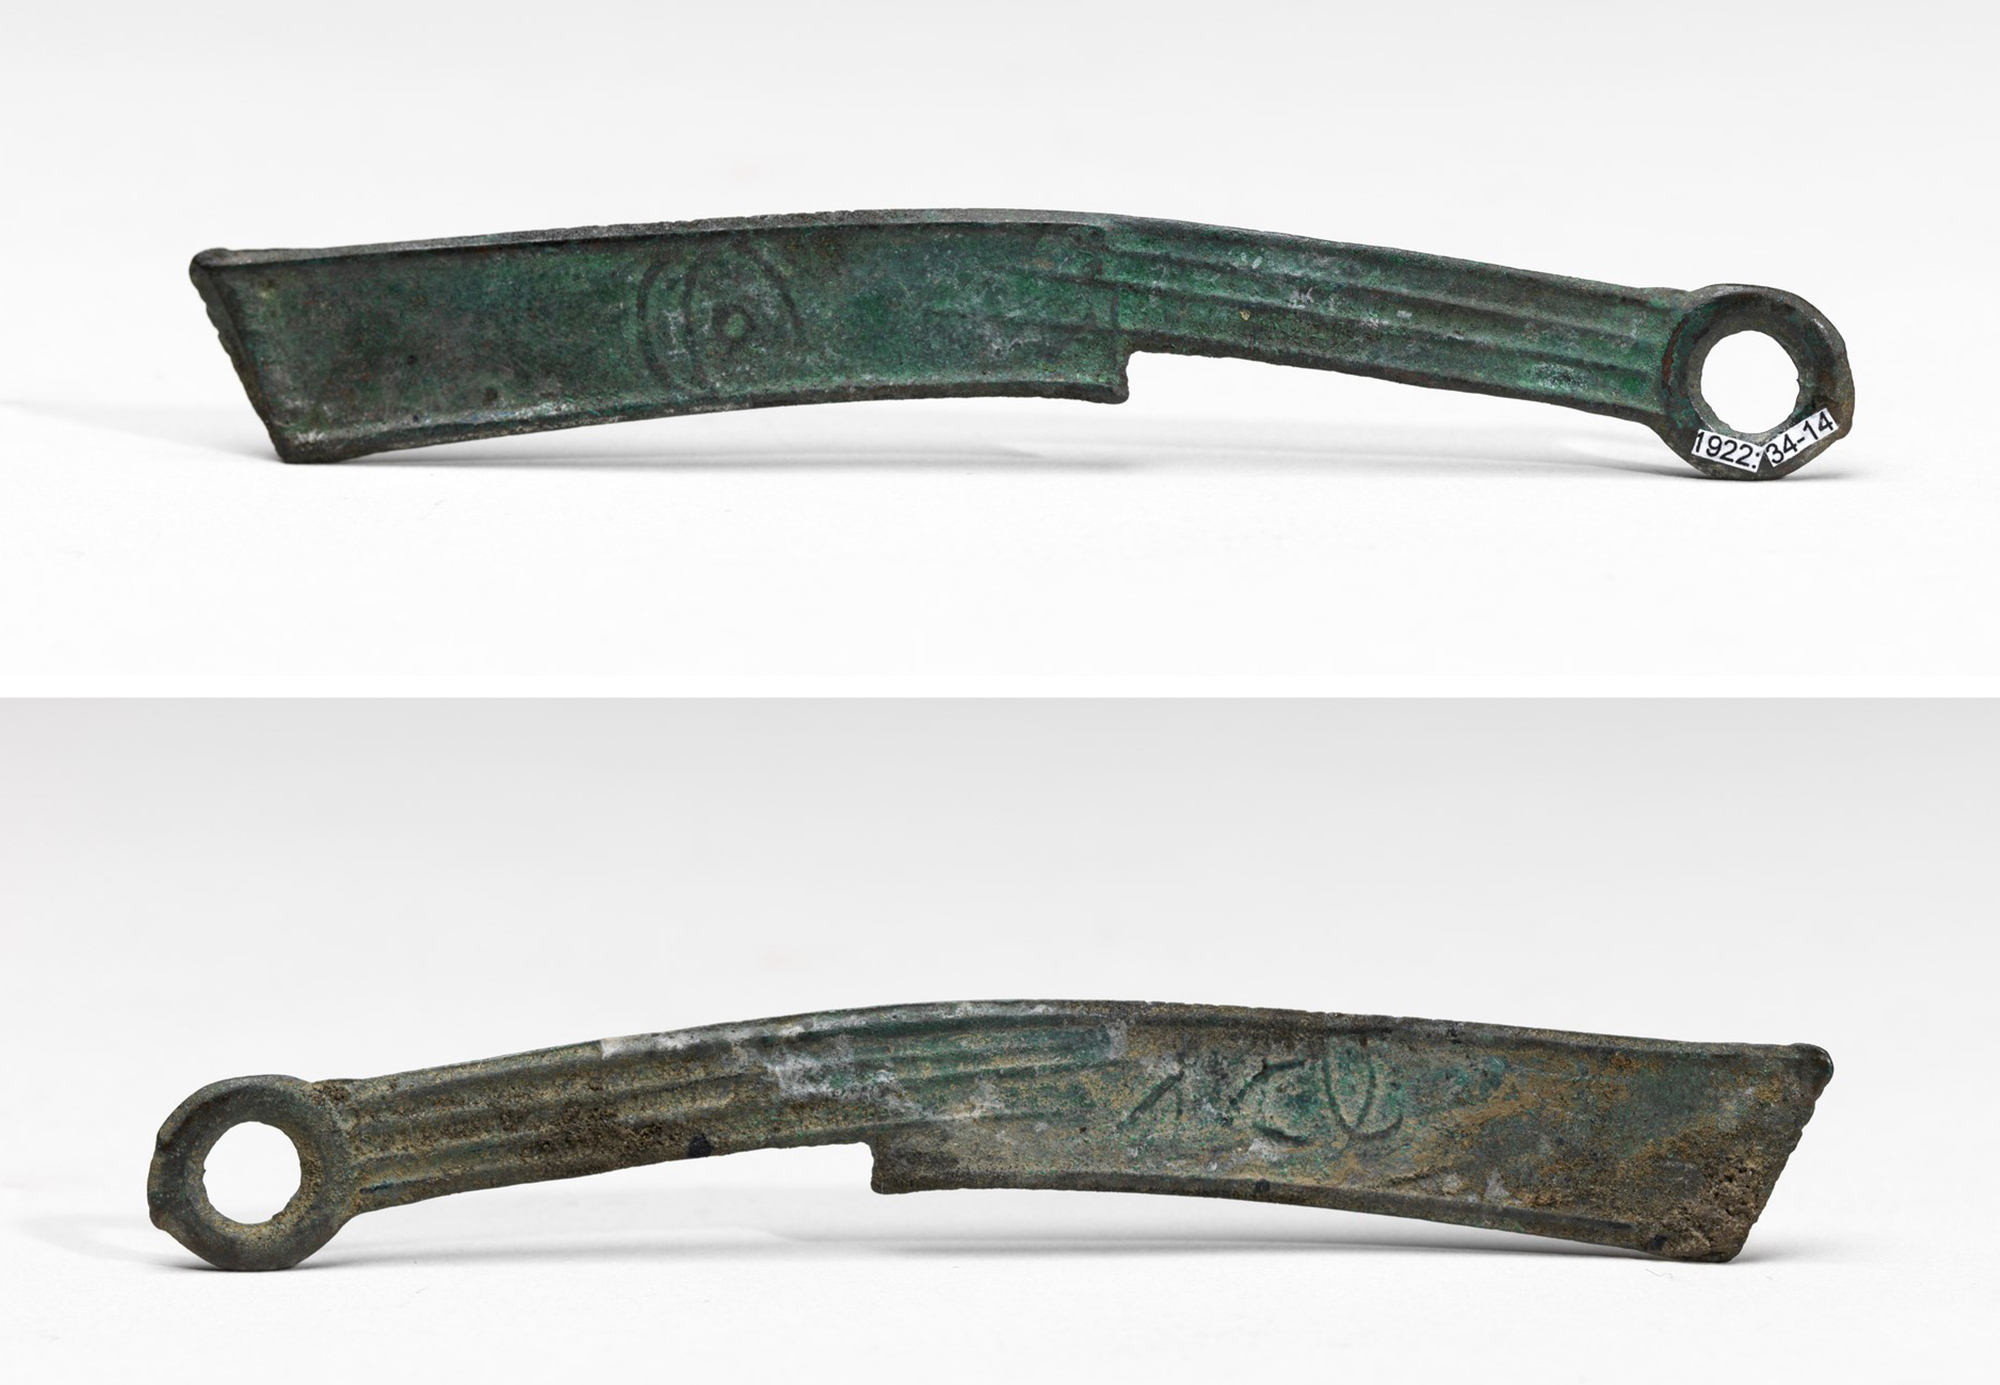 Ancient Chinese knives used for money called "knife money"